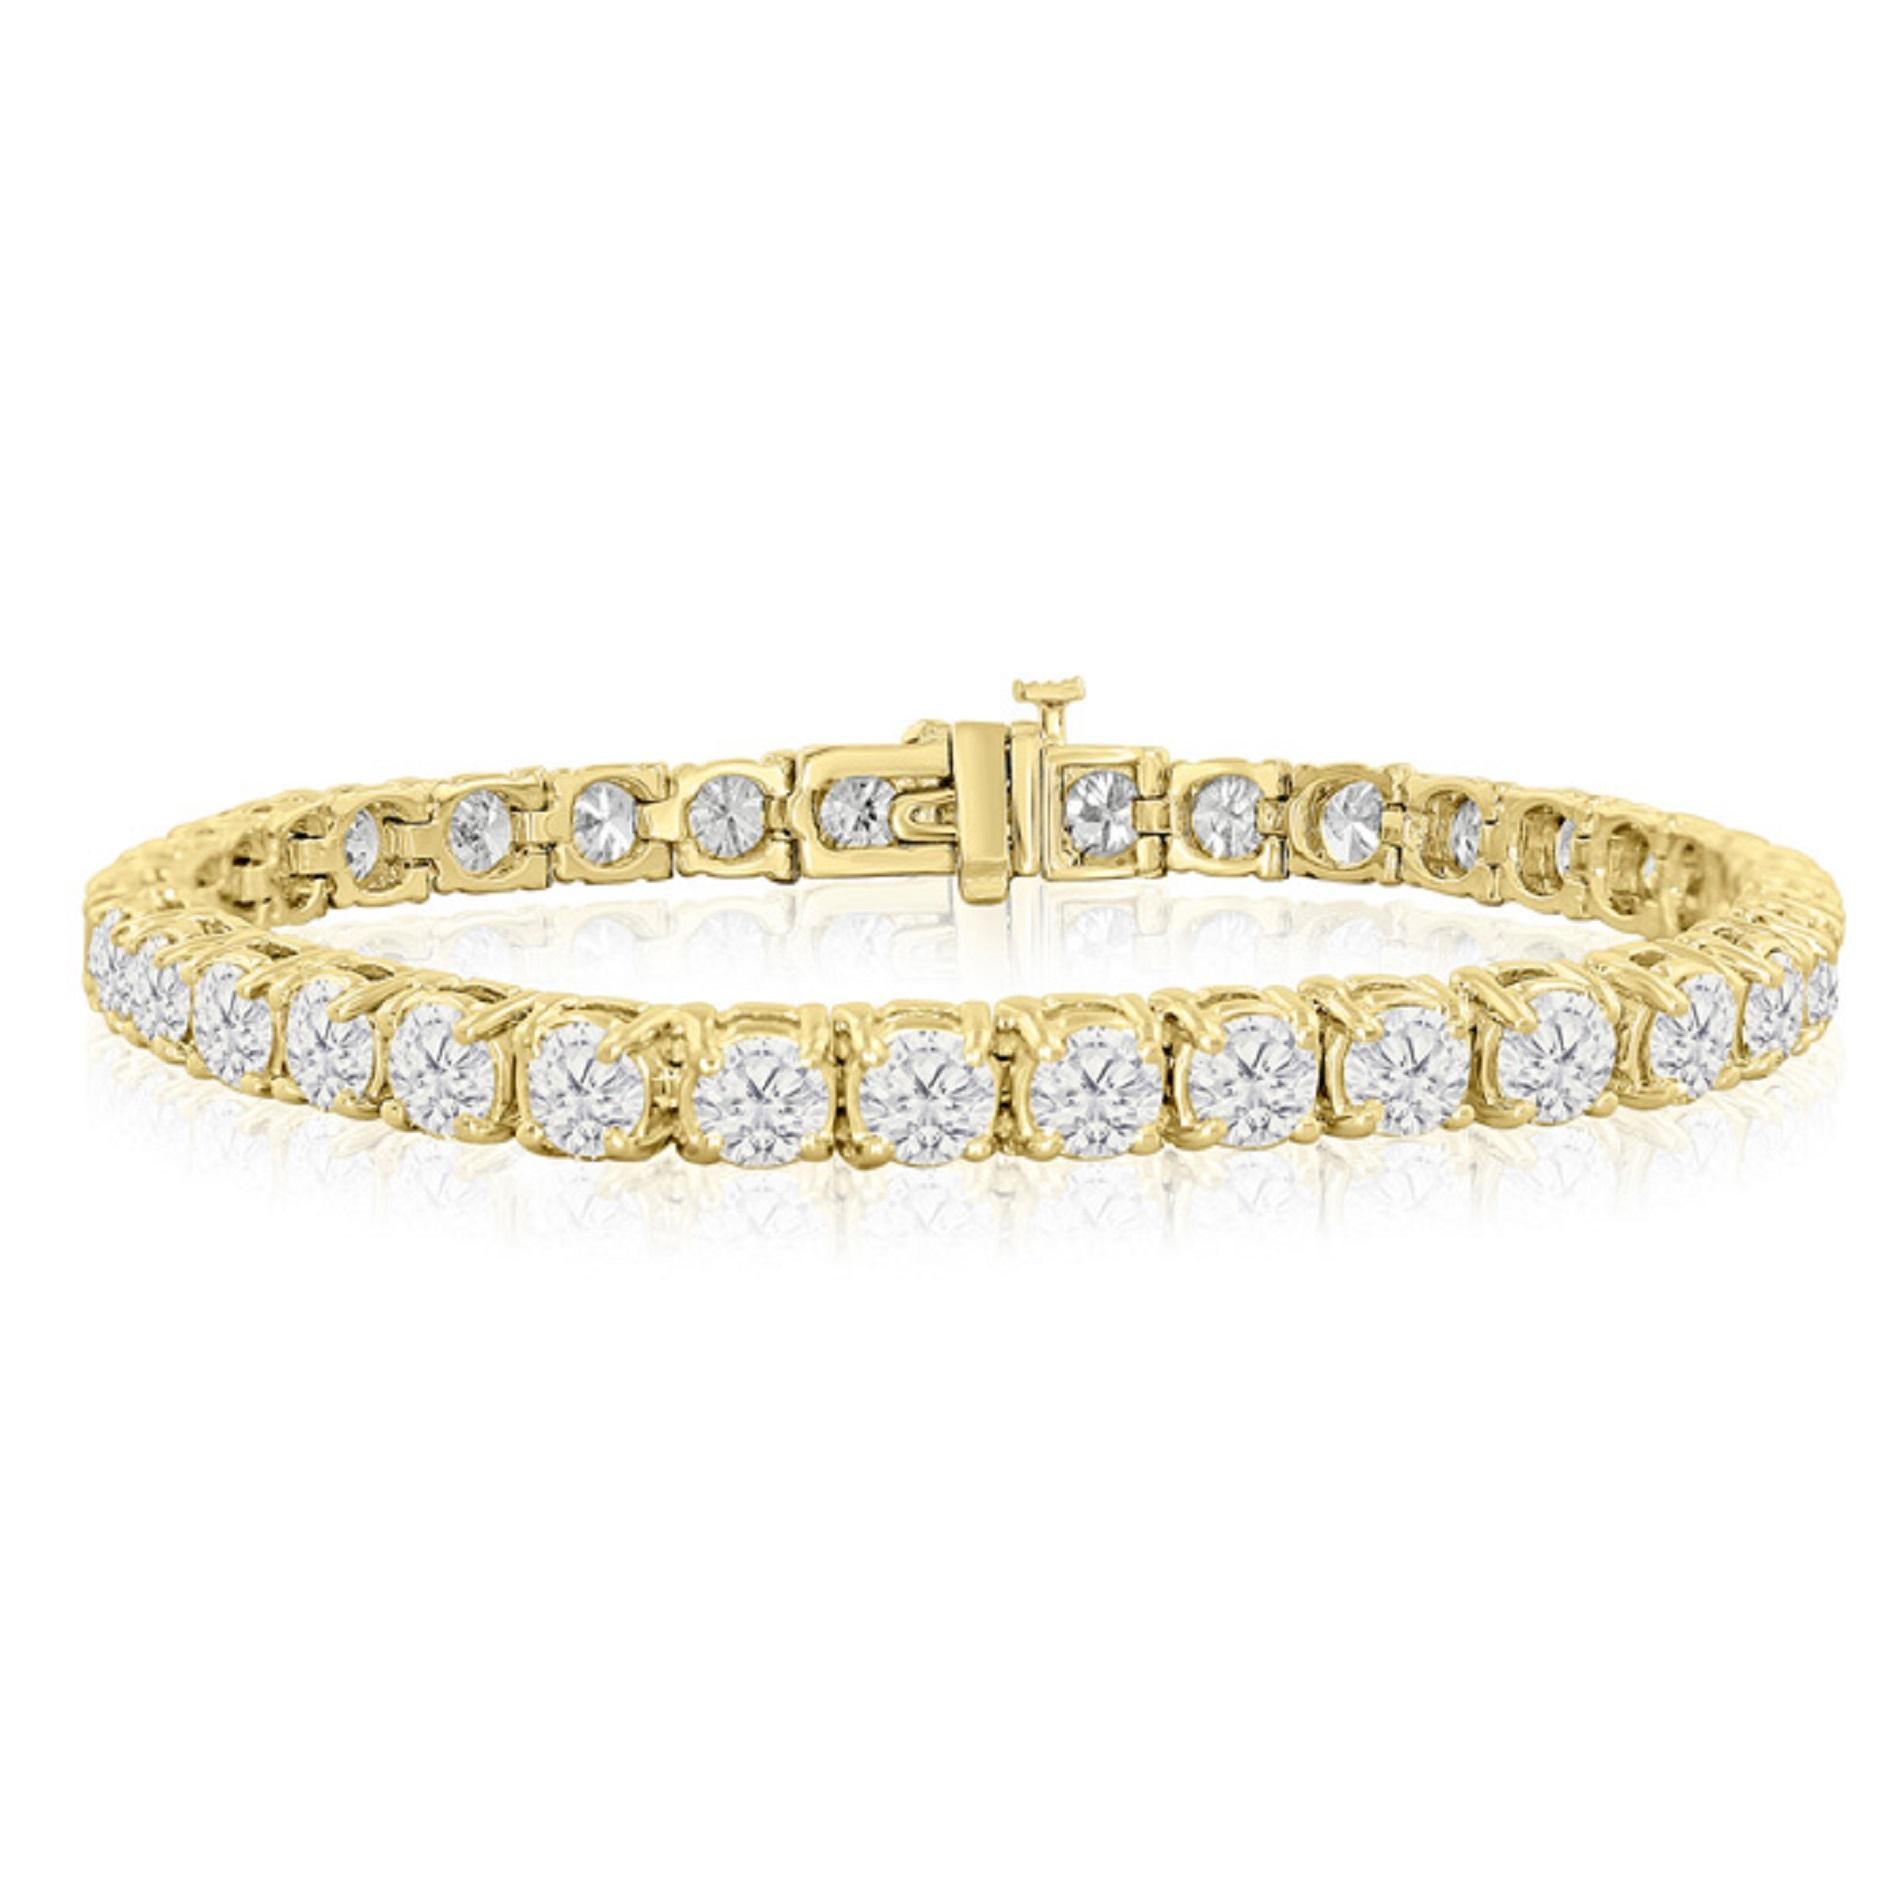 7-inch tennis bracelet in 18K yellow gold, featuring 31 round diamonds in a basket claw prong setting, totaling 19.15 carats.